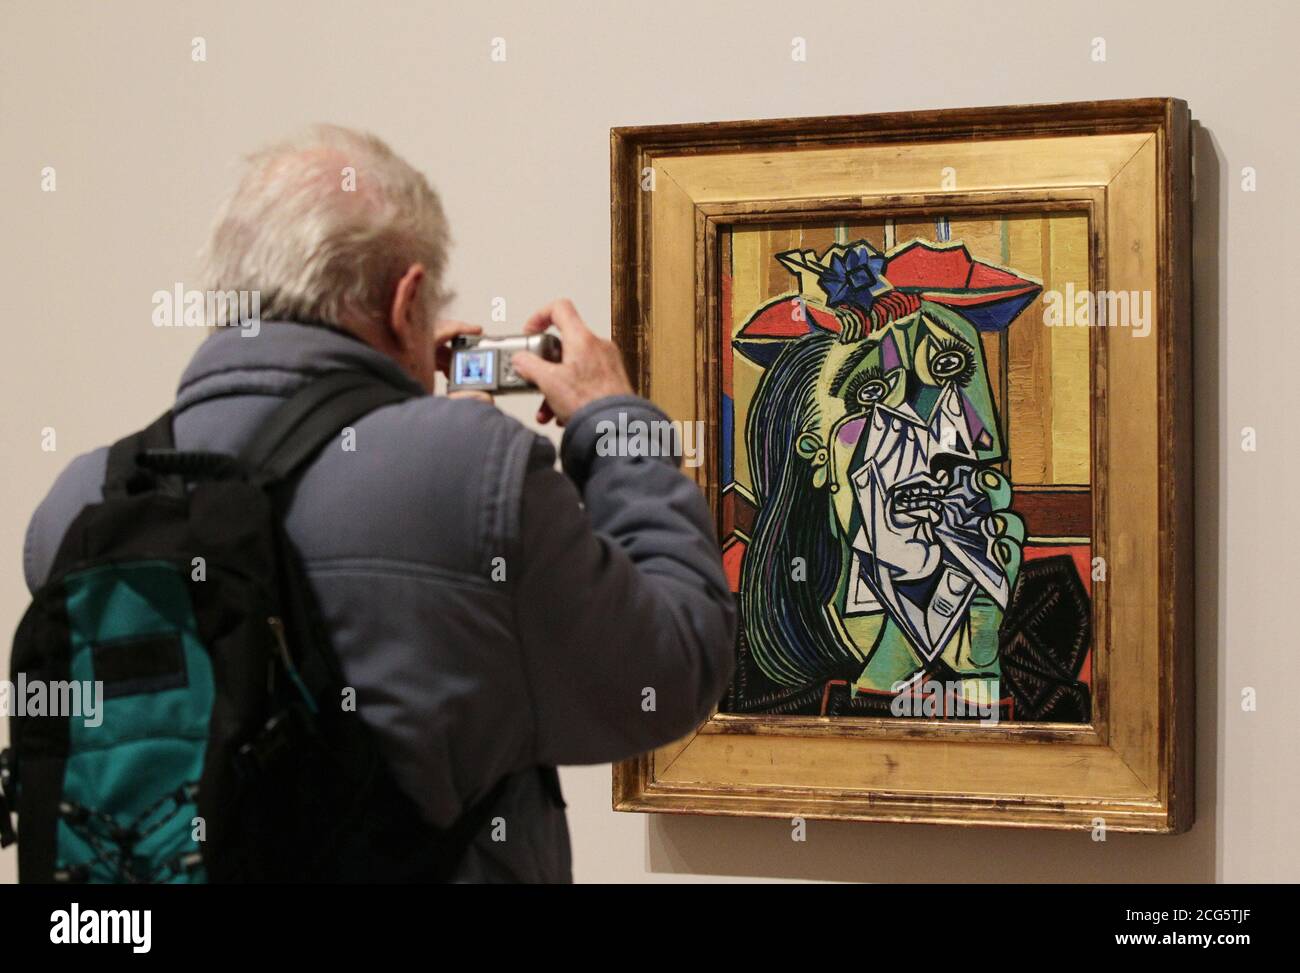 A visitor takes a photograph Weeping Woman (1937), by Pablo Picasso, on display during a press preview of the 'Picasso and Modern British Art' exhibition, at Tate Britain in London. Stock Photo